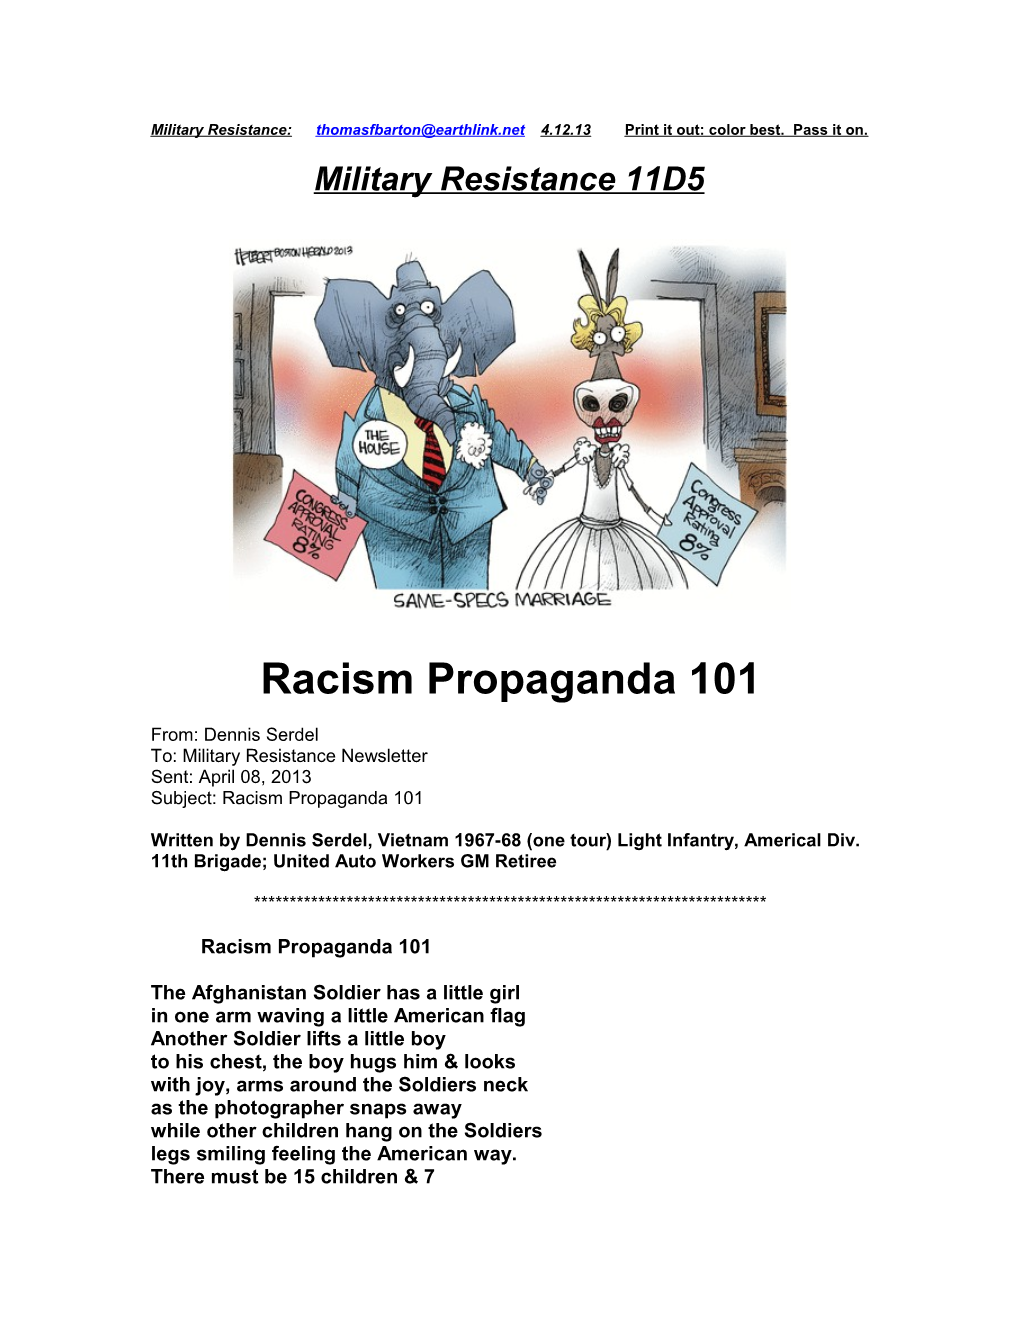 Military Resistance 11D5